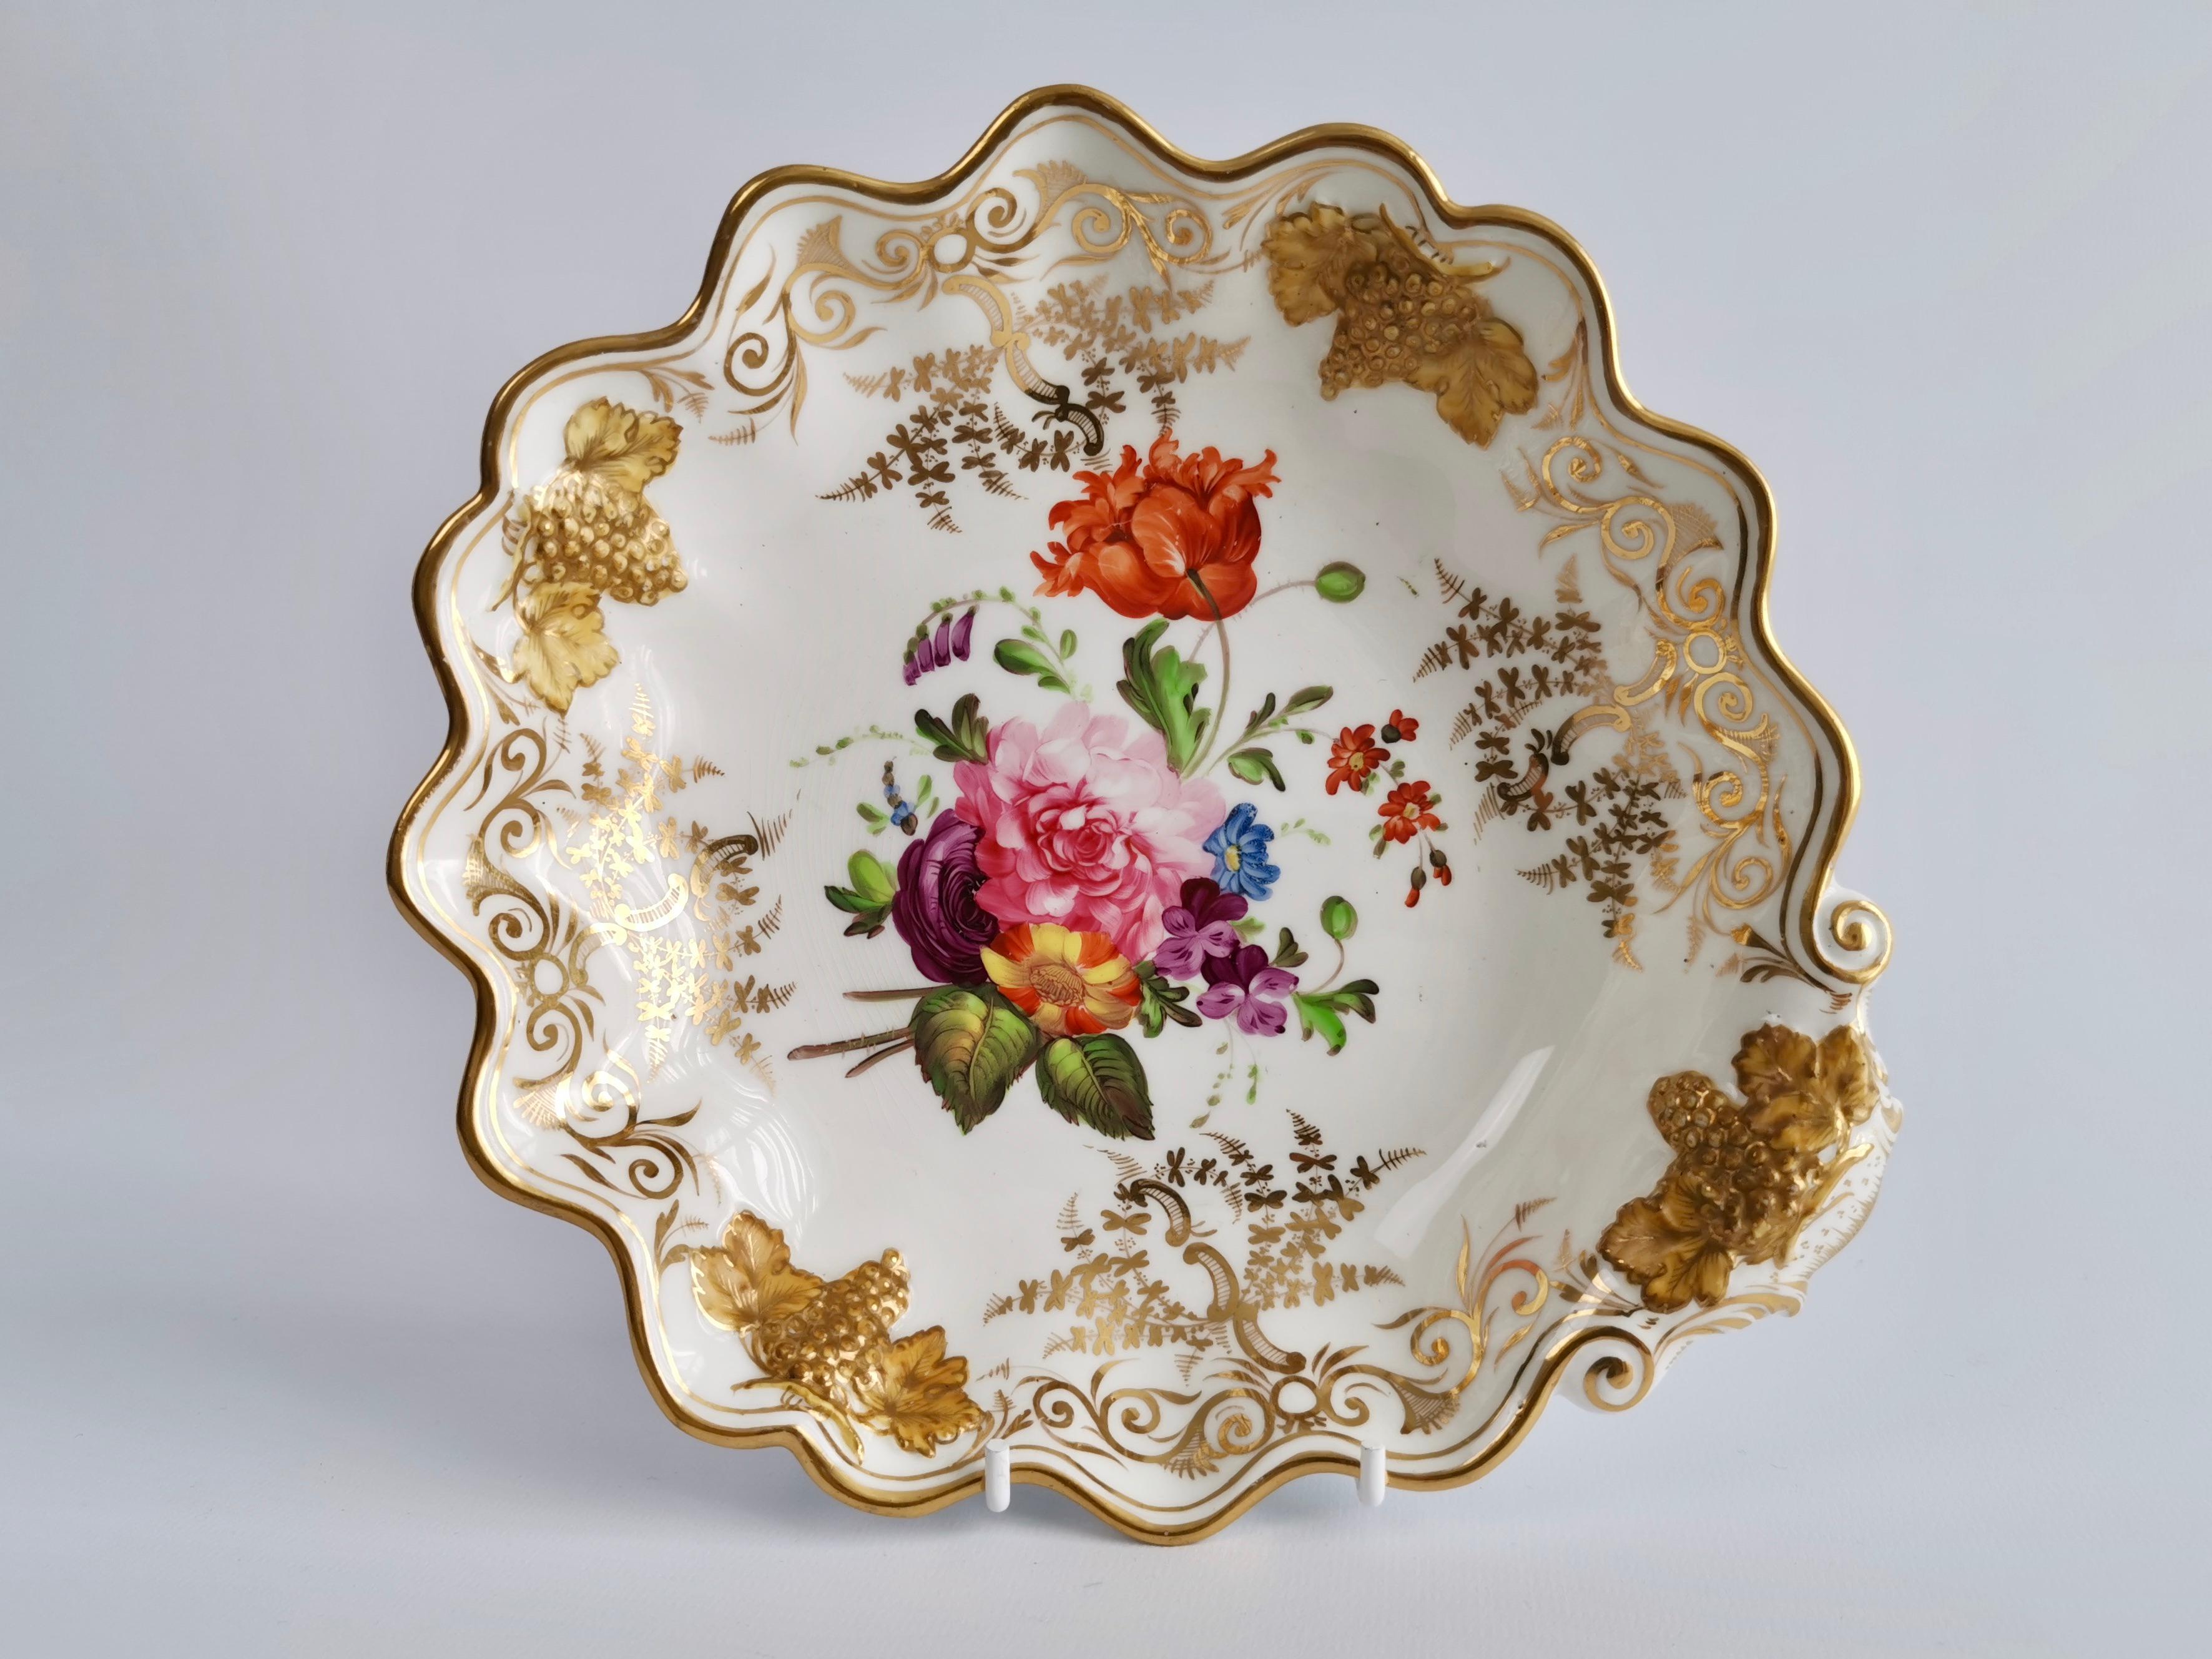 English Set of Coalport Dessert Dishes, Grape-moulded, Gilt and Flowers, circa 1820